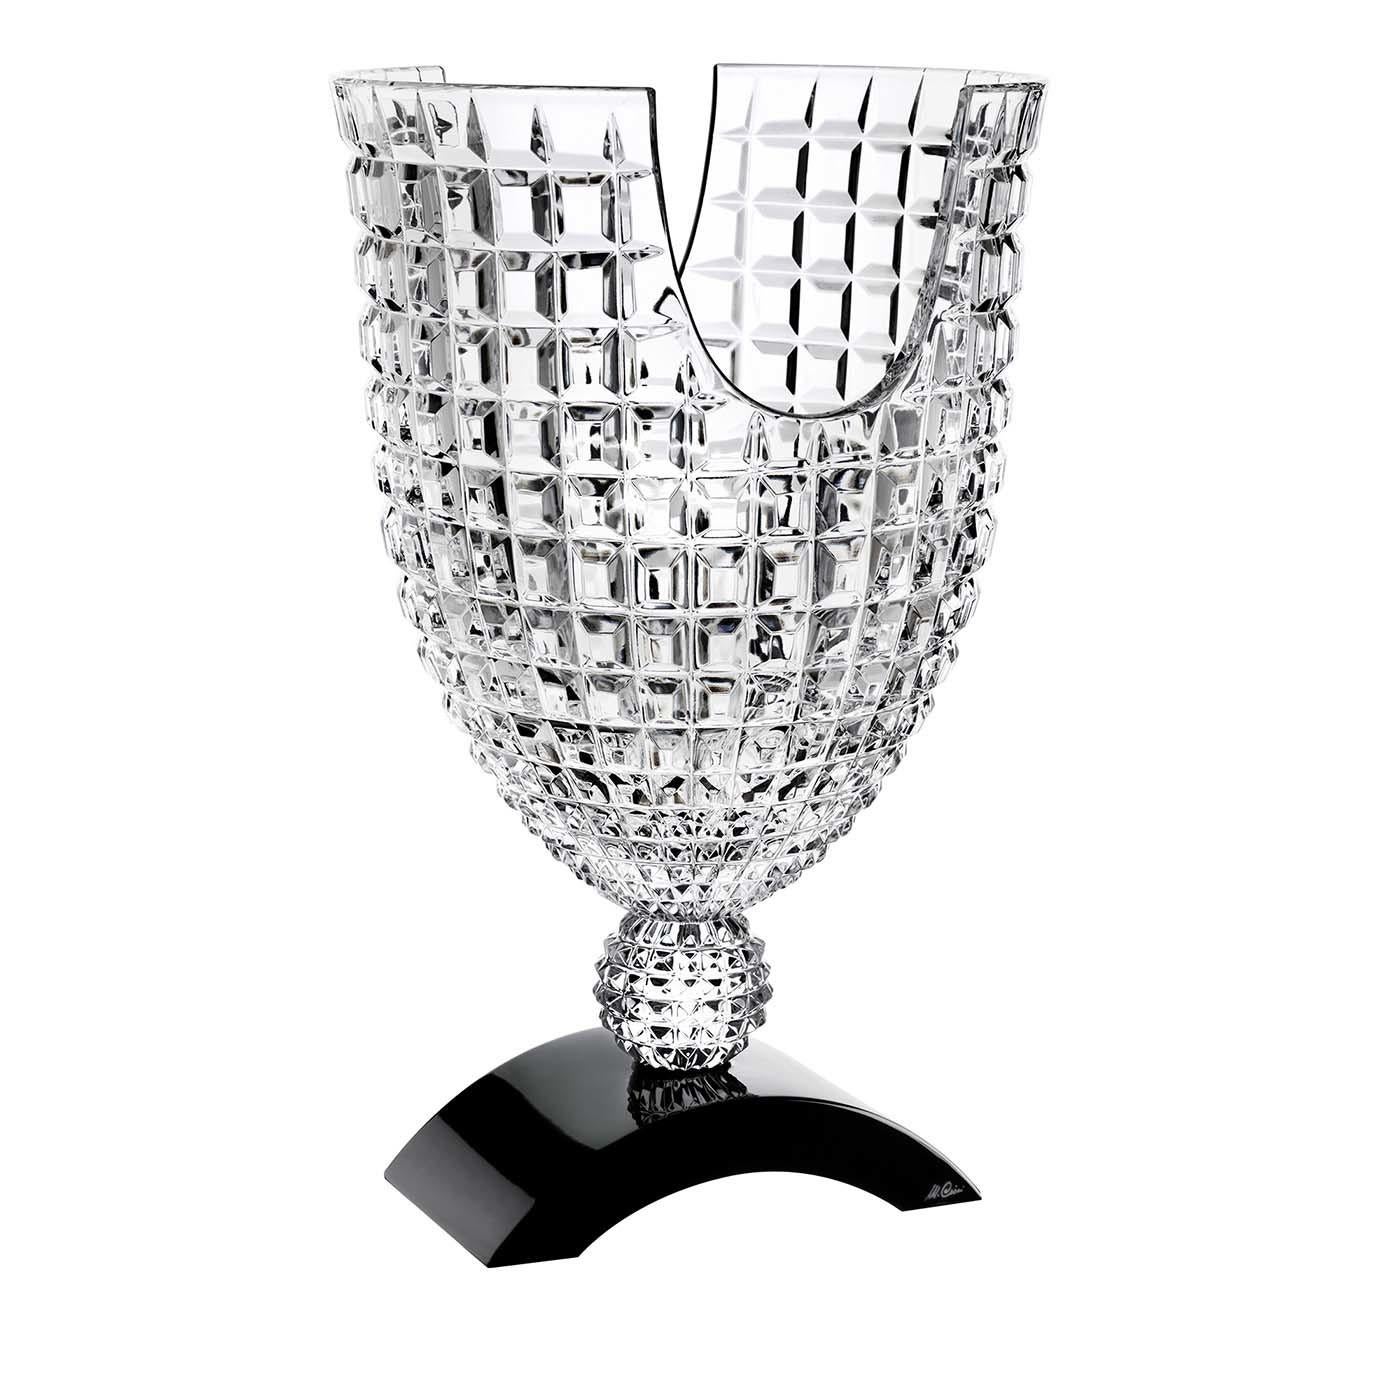 A stunning work of art, this crystal vase is a magnificent sculptural object that can be displayed anywhere in the house to imbue it with bold sophistication. The semi-arched black crystal base supports a spherical element where rests a symmetrical